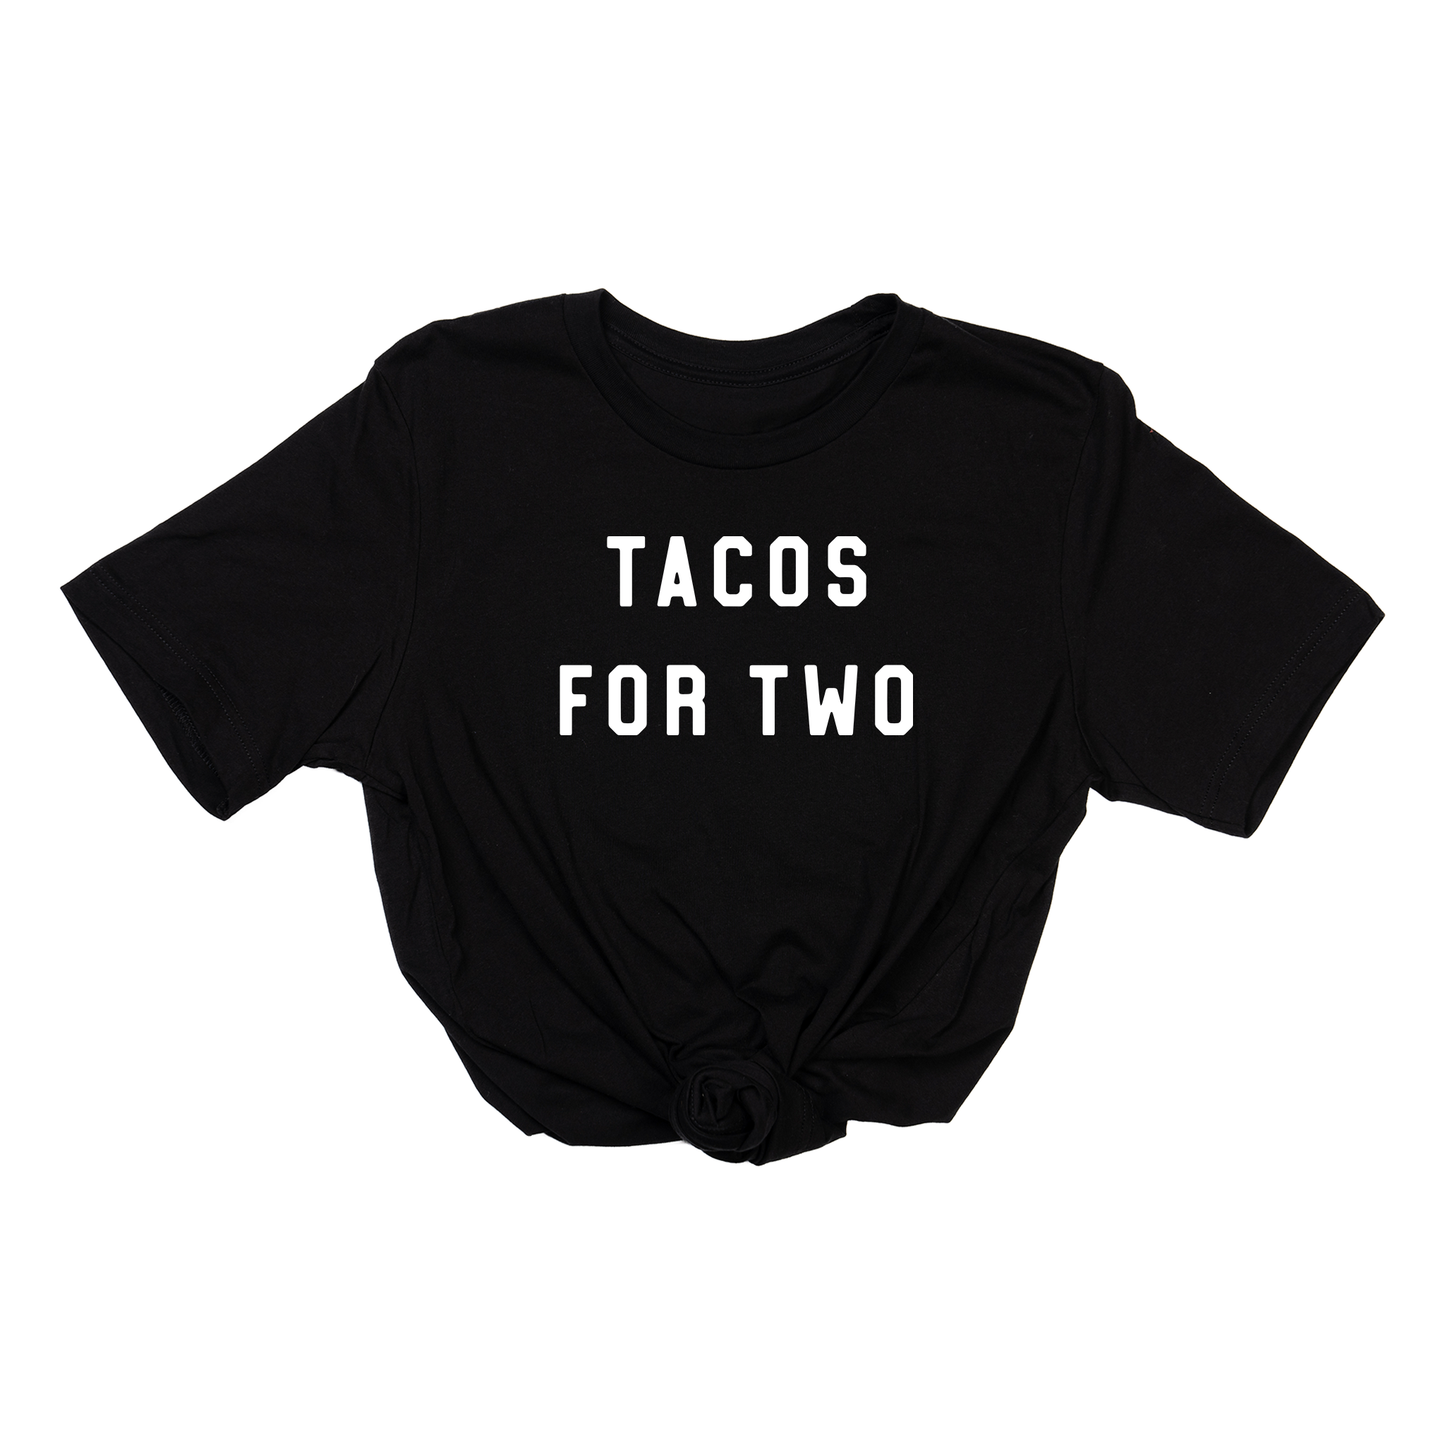 Tacos For Two (White) - Tee (Black)